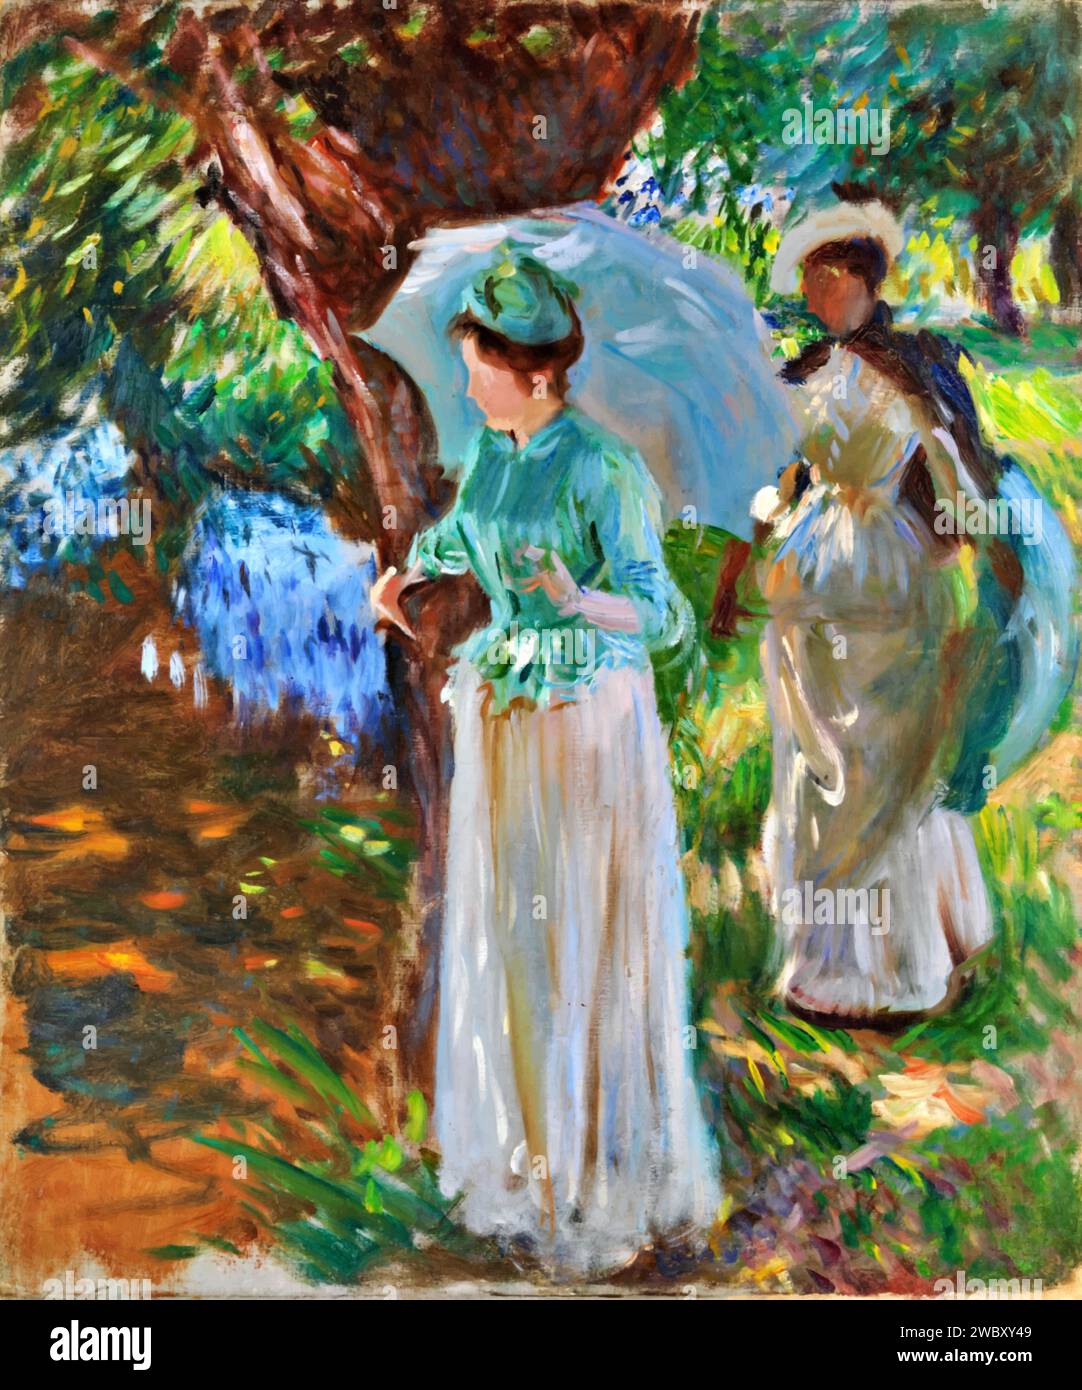 Two Girls with Parasols, 1888 (Painting) dell'artista Monet, Claude (1840-1926) francese. Illustrazione Vettoriale